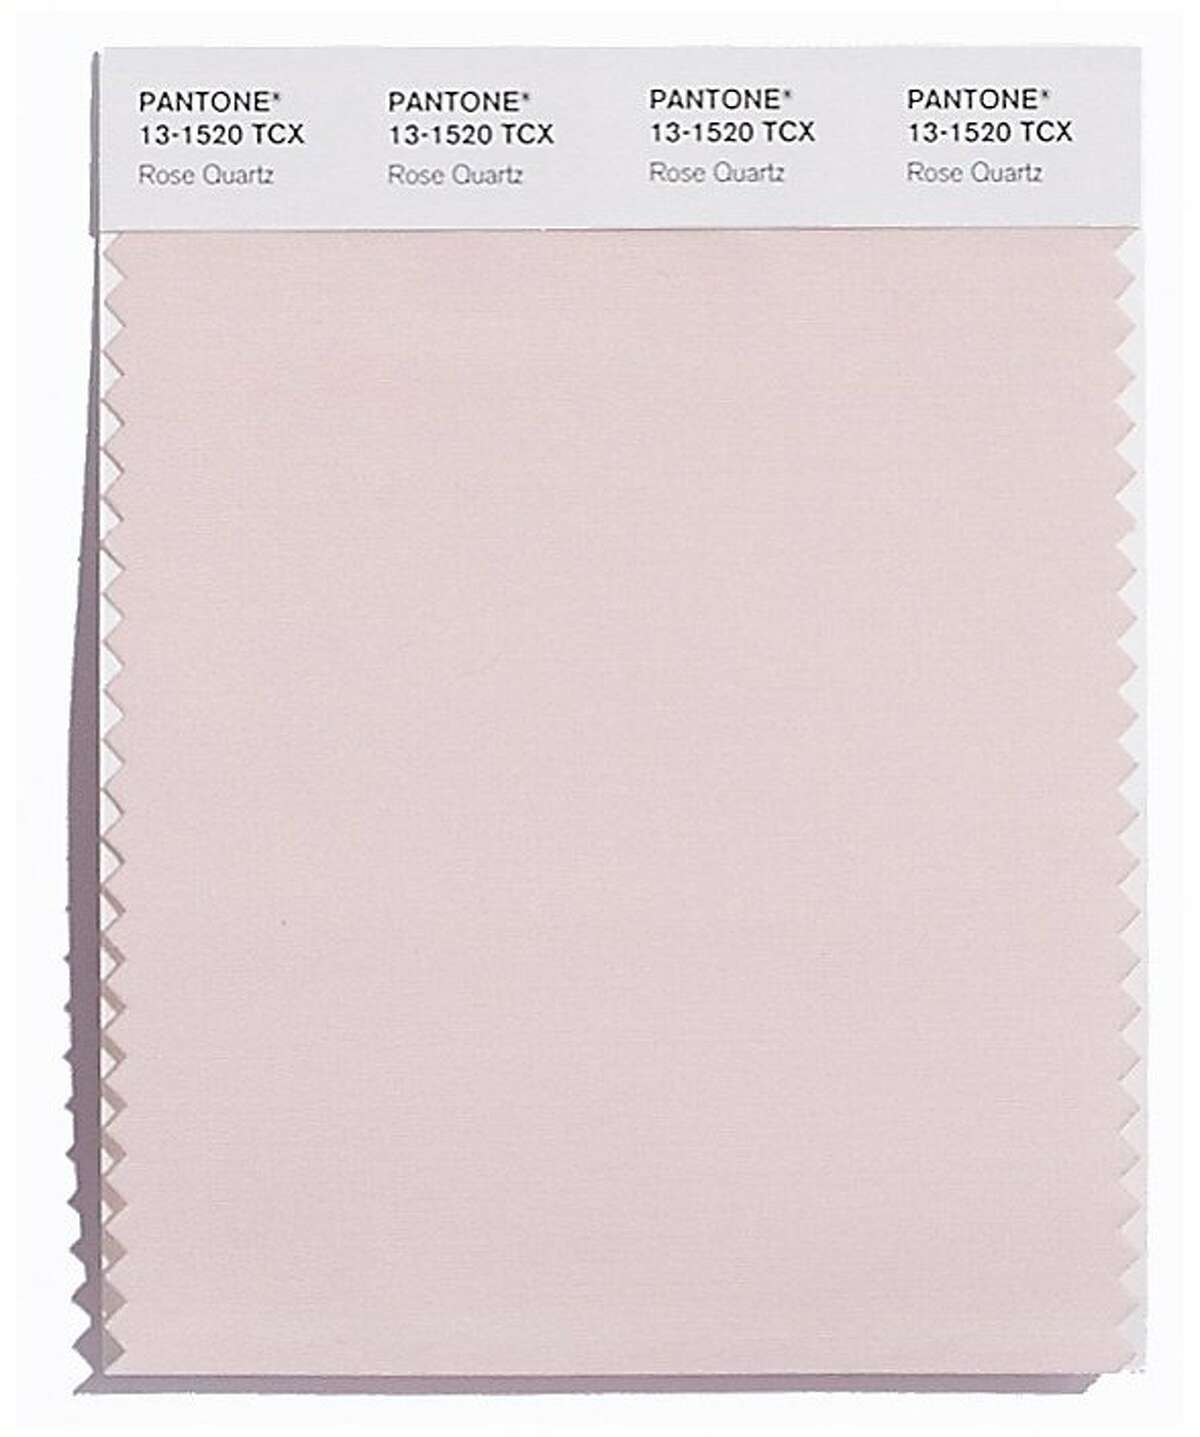 This color swatch image released by Pantone shows a shade of pink, called R...